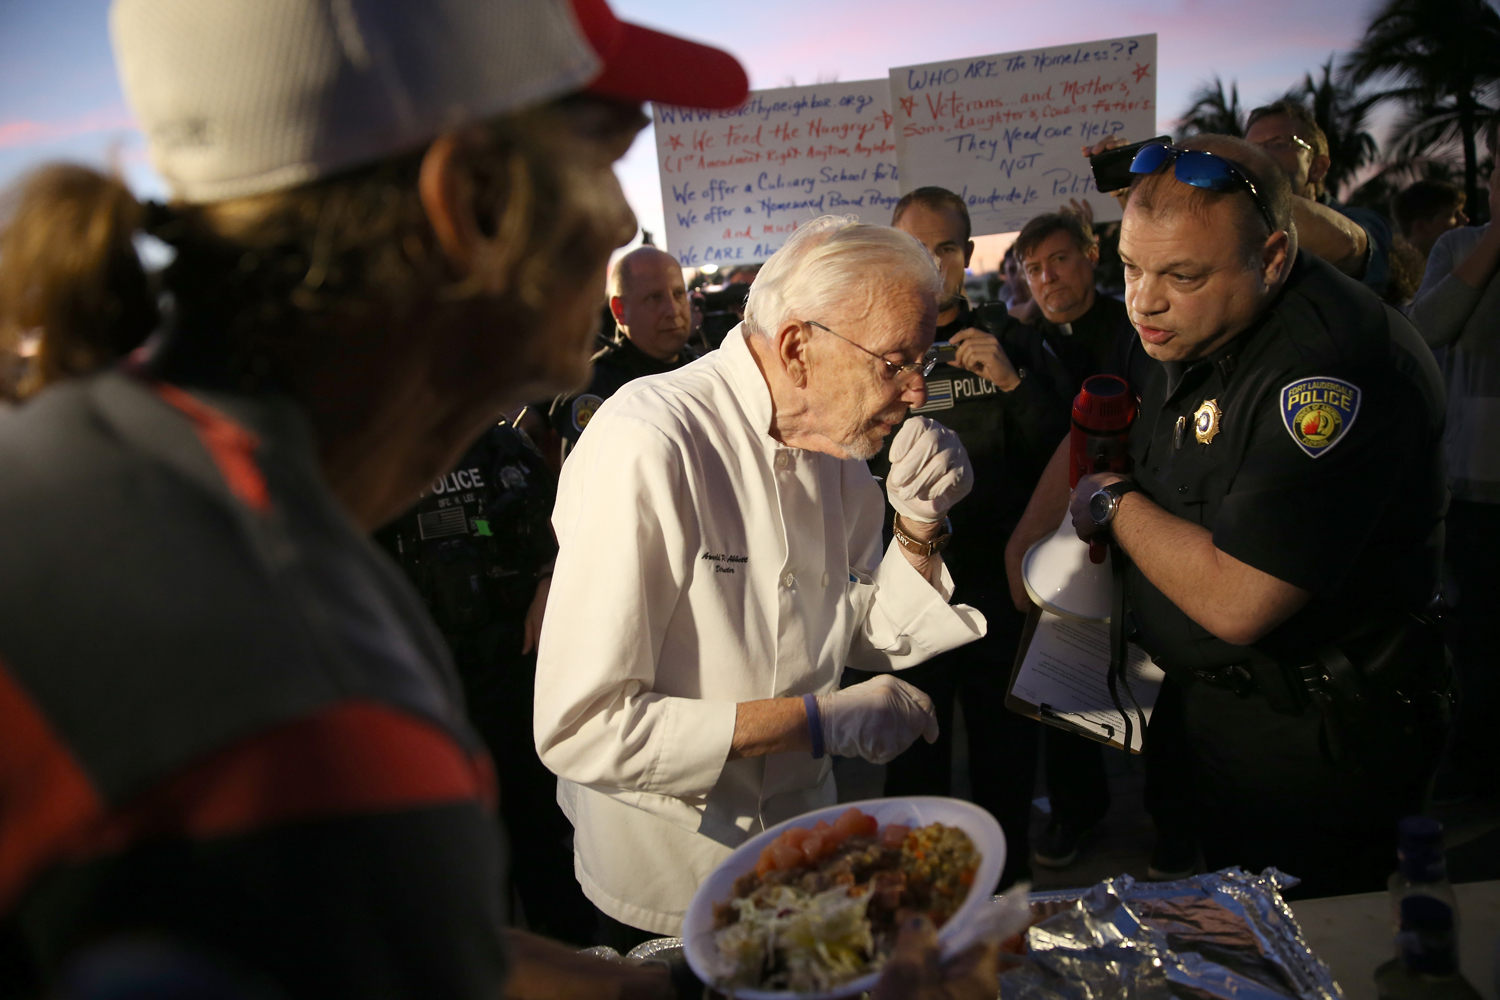 Fort Lauderdale Police Officer, Sgt. Al Lerner  (R), speaks with Arnold Abbott, a 90-year-old chef , as he warns him that he will be cited for feeding homeless in violation of a recently passed city law on November 12, 2014 in Fort Lauderdale, Florida. (Joe Raedle — Getty Images)